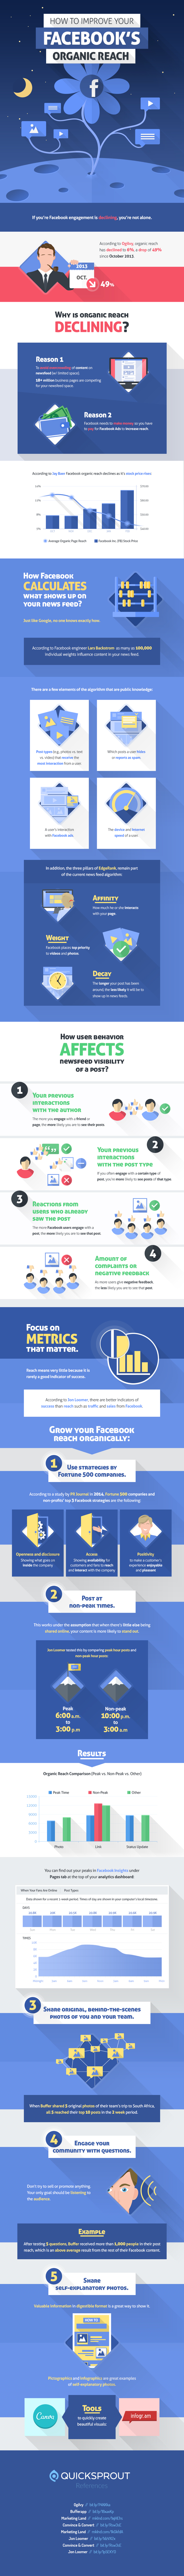 How to Improve Organic Reach on Facebook Infographic image